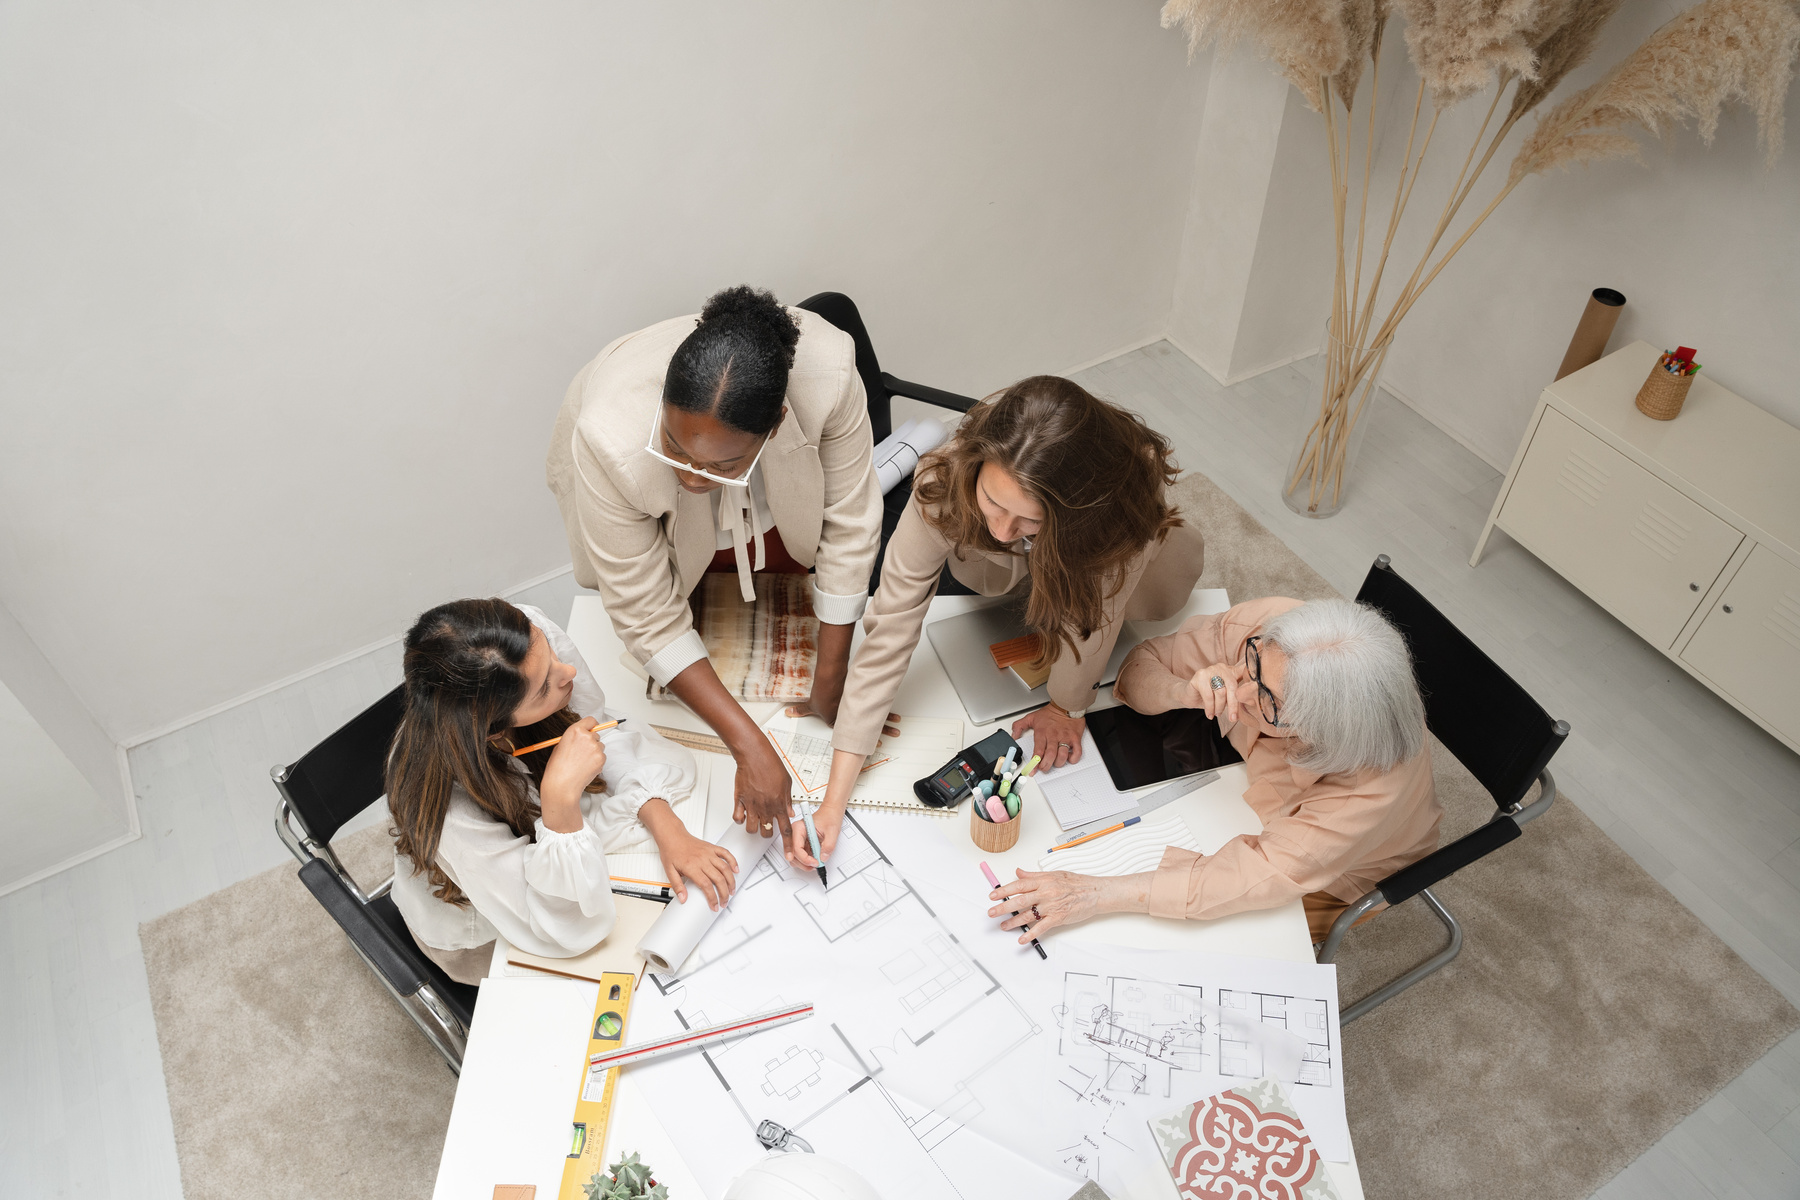 Group of Women Collaborating on an Architectural Project